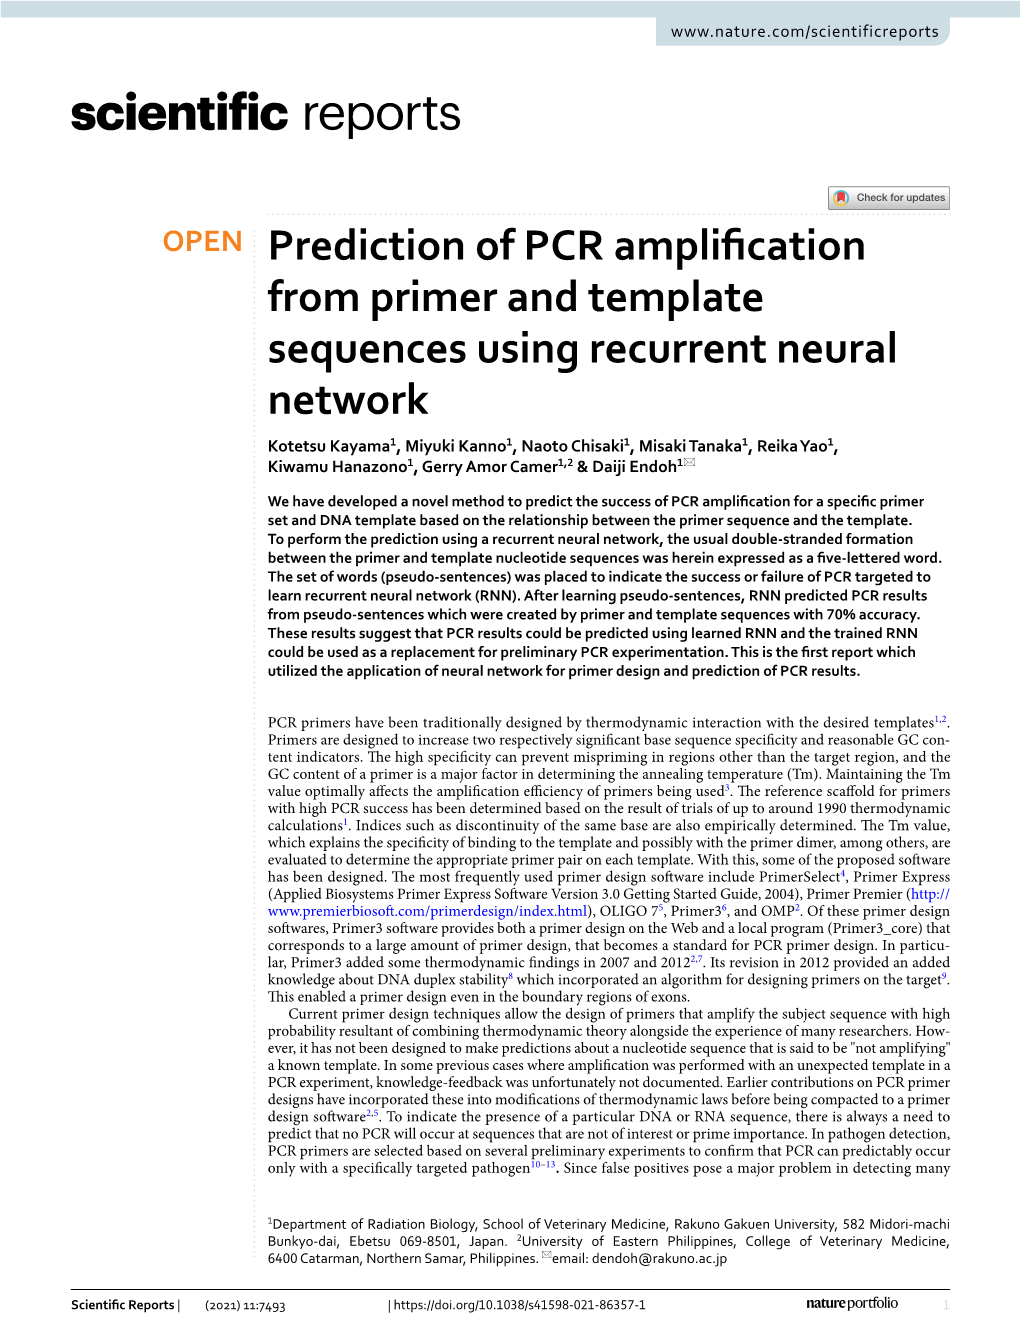 Prediction of PCR Amplification from Primer and Template Sequences